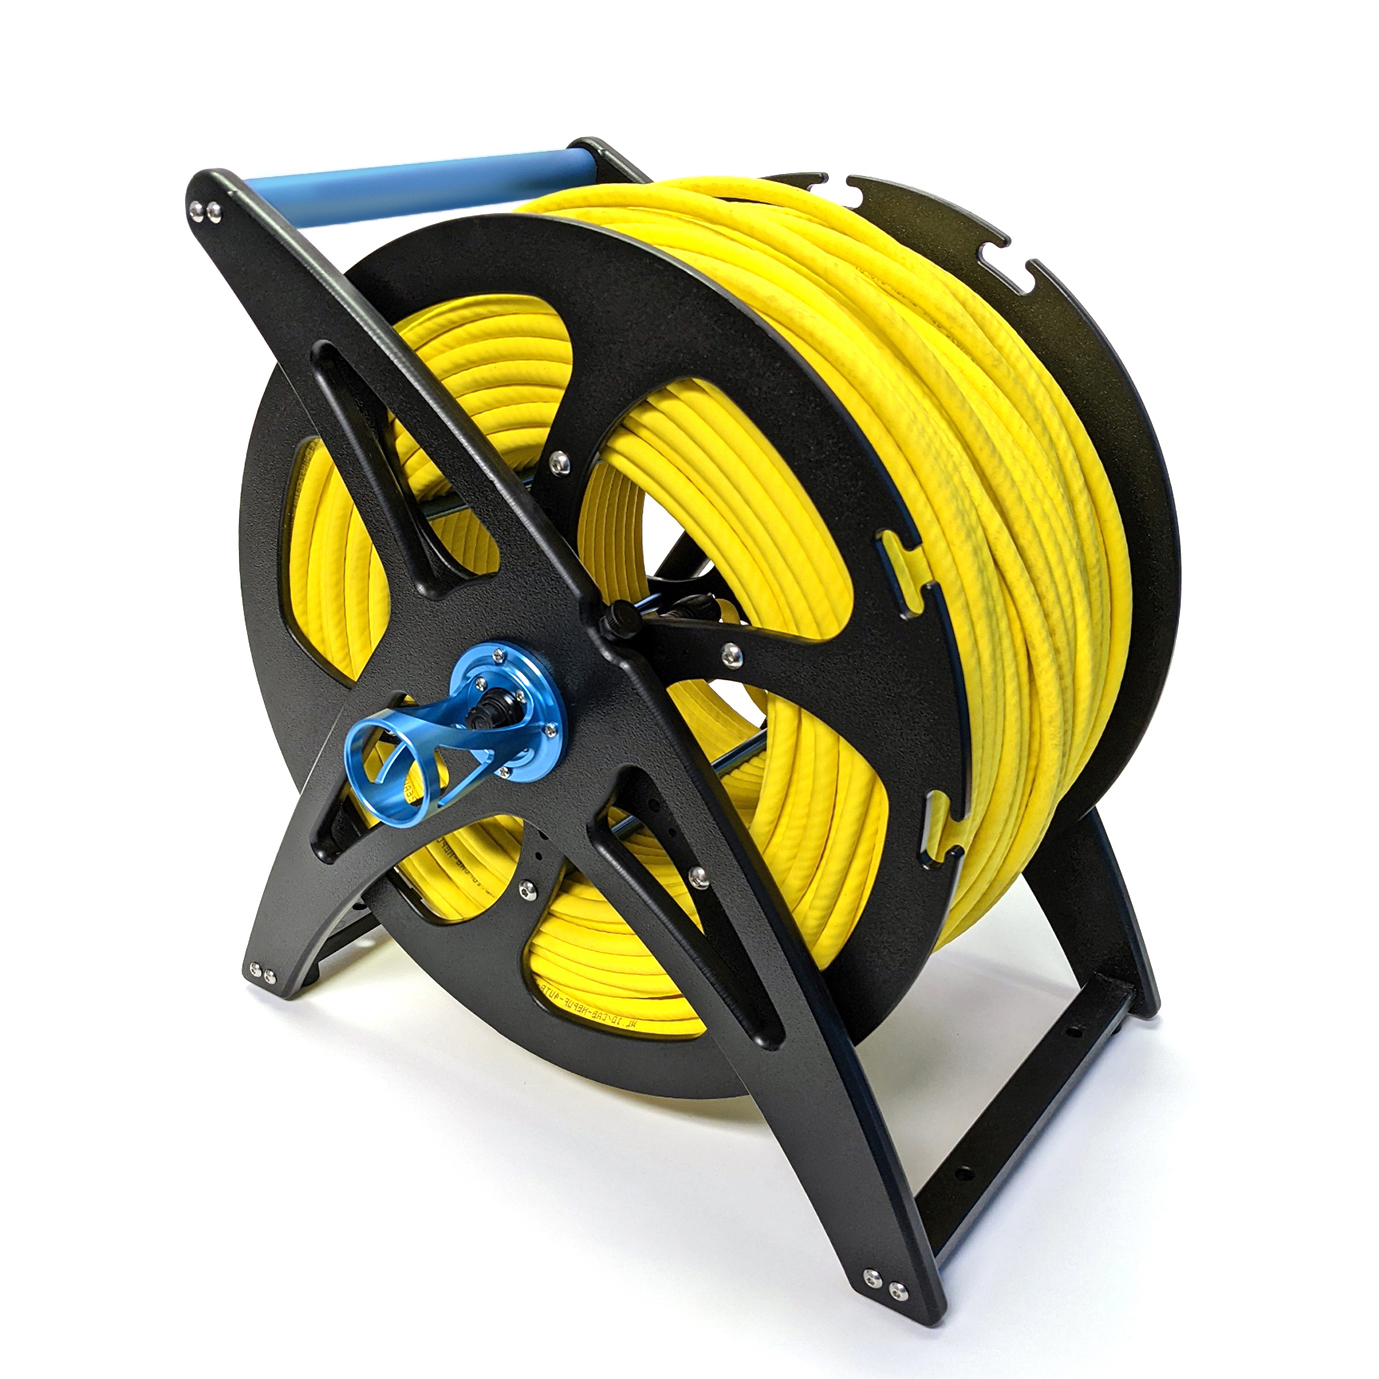 3 Wire Reels + 1 Steel Cable Caddy, Wire Dispenser Reels